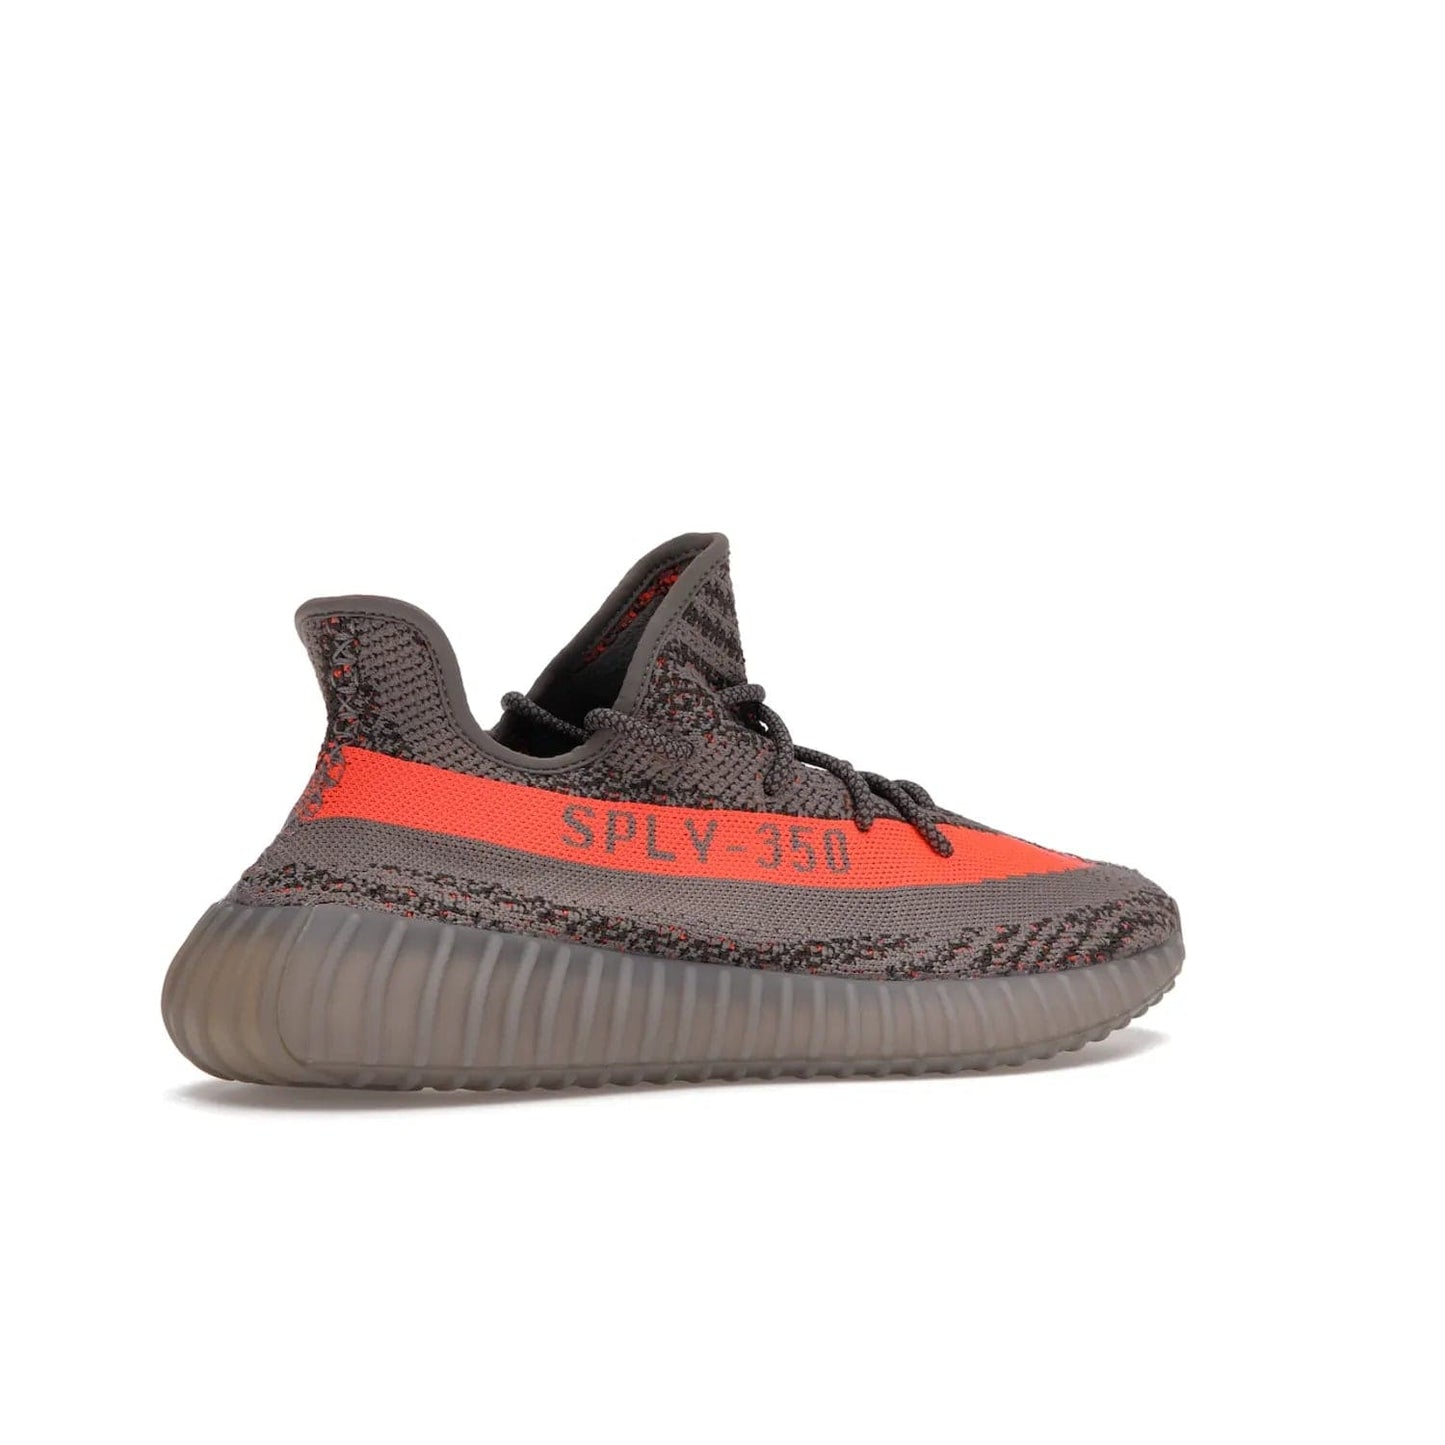 adidas Yeezy Boost 350 V2 Beluga Reflective - Image 34 - Only at www.BallersClubKickz.com - Shop the adidas Yeezy Boost 350 V2 Beluga Reflective: a stylish, reflective sneaker that stands out. Featuring Boost sole, Primeknit upper & signature orange stripe. Available Dec 2021.